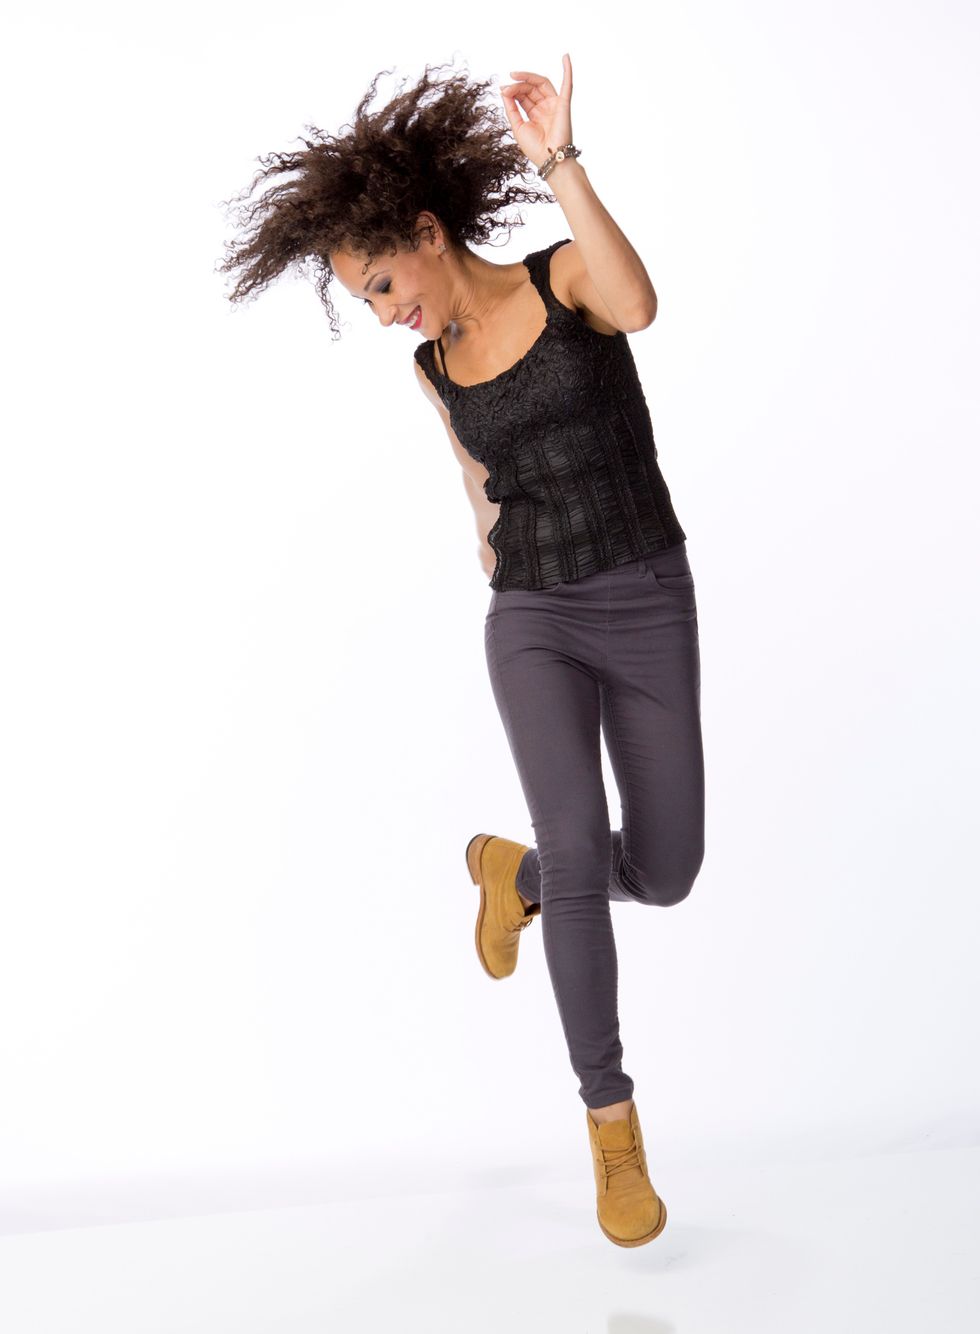 Ayodele Casel hops on one foot against a white backdrop. She is wearing tan tap boots, gray jeans and a black tank.